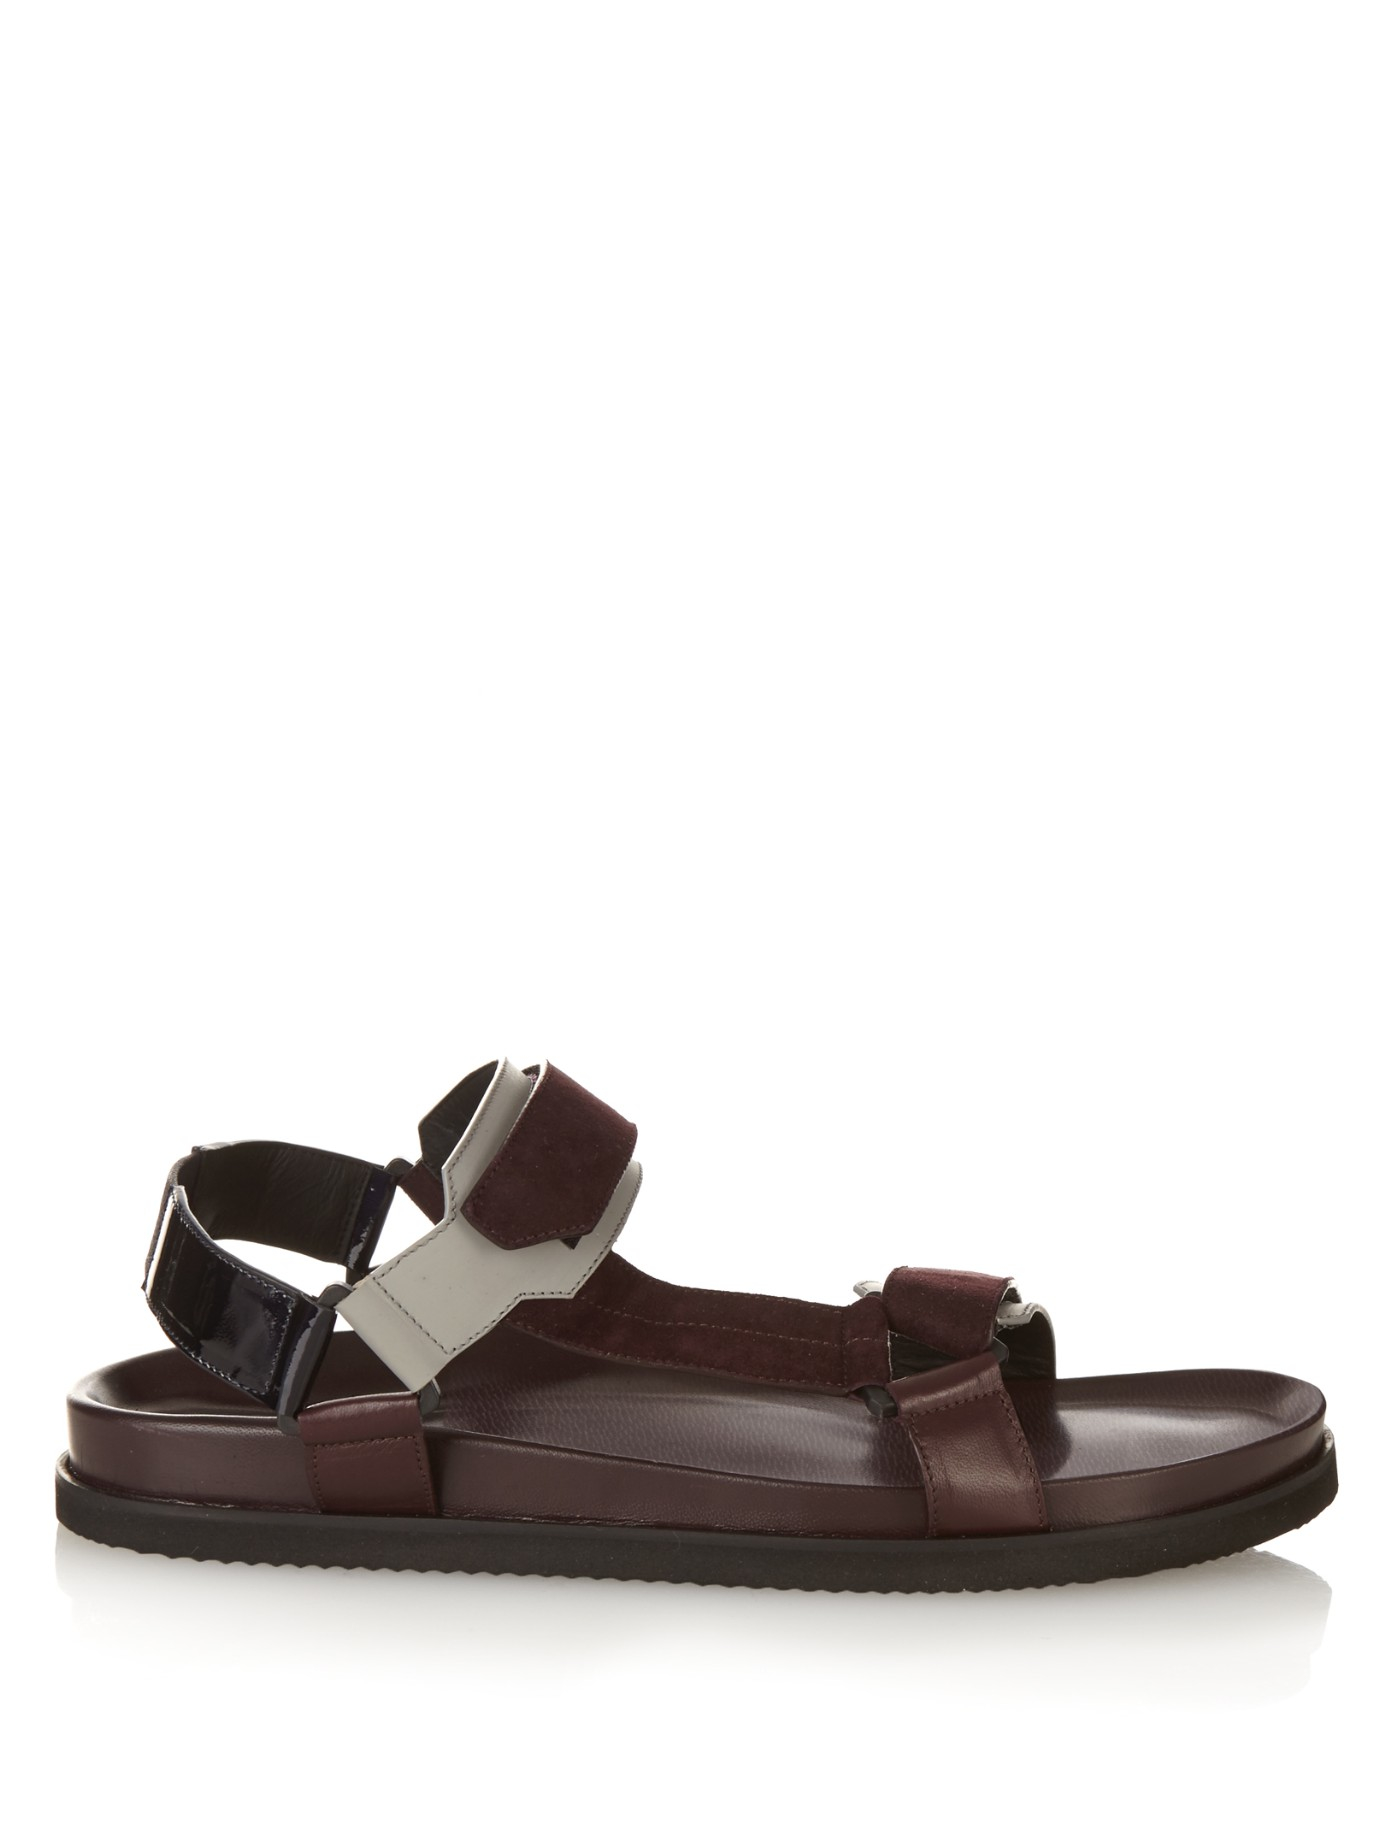 Lyst - Joseph Multi-strap Leather And Suede Sandals in Blue for Men